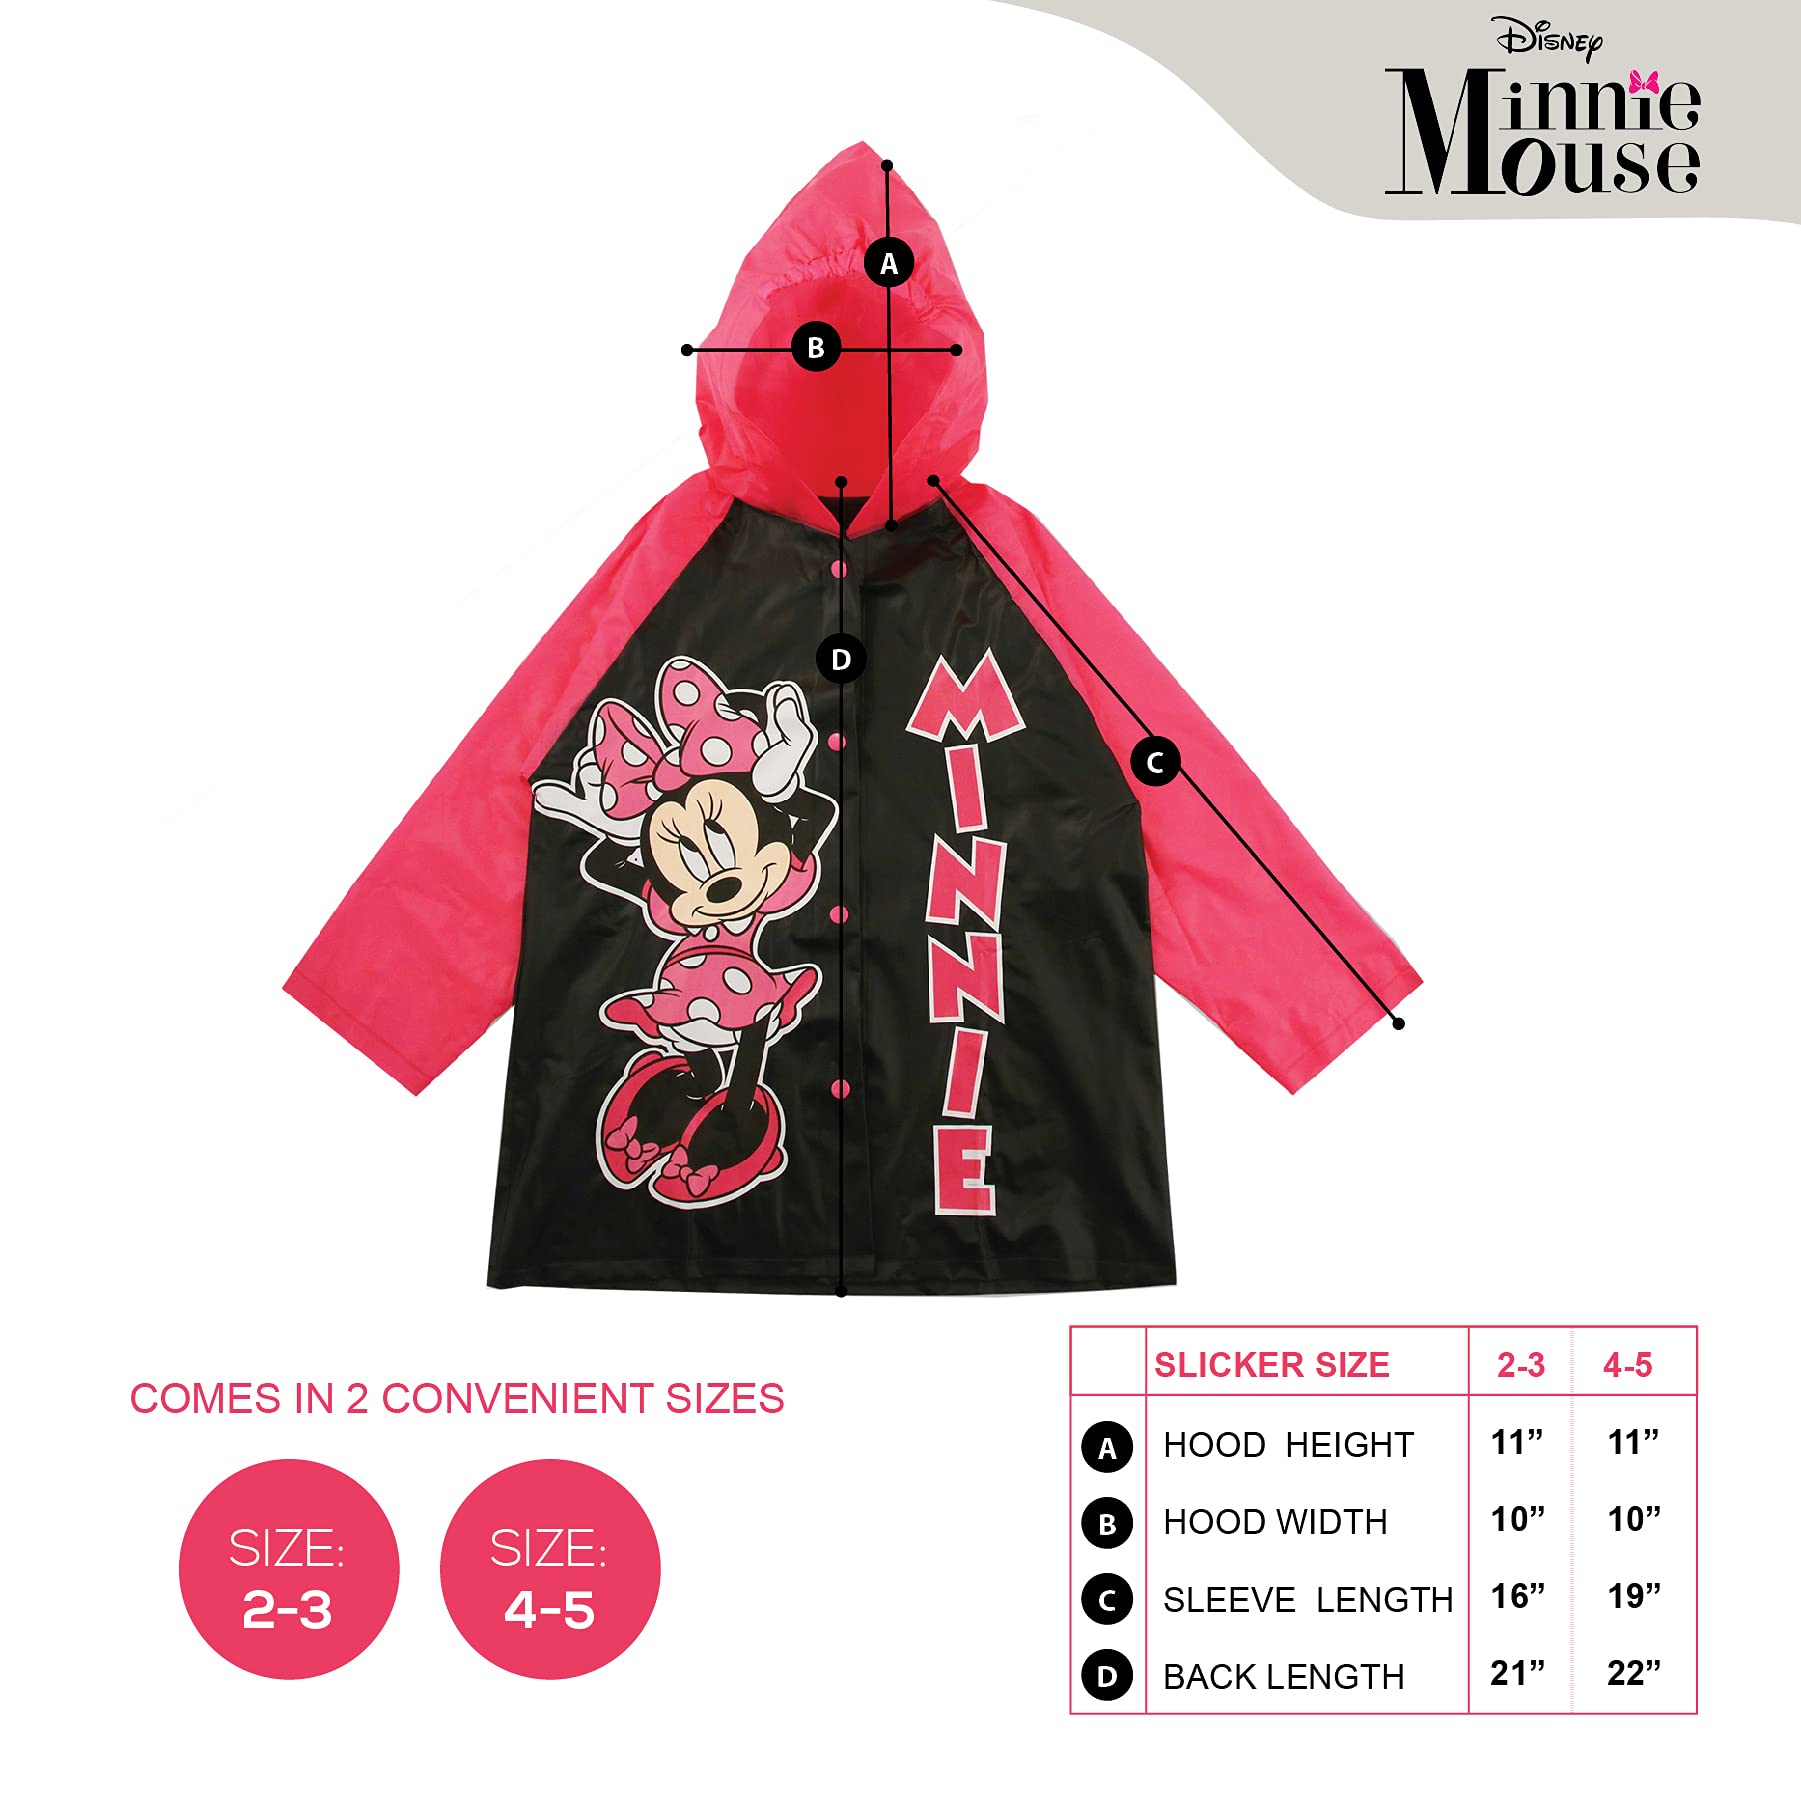 Disney Minnie Mouse Kids Umbrella with Matching Rain Poncho for Girls Ages 2-7 - image 5 of 8